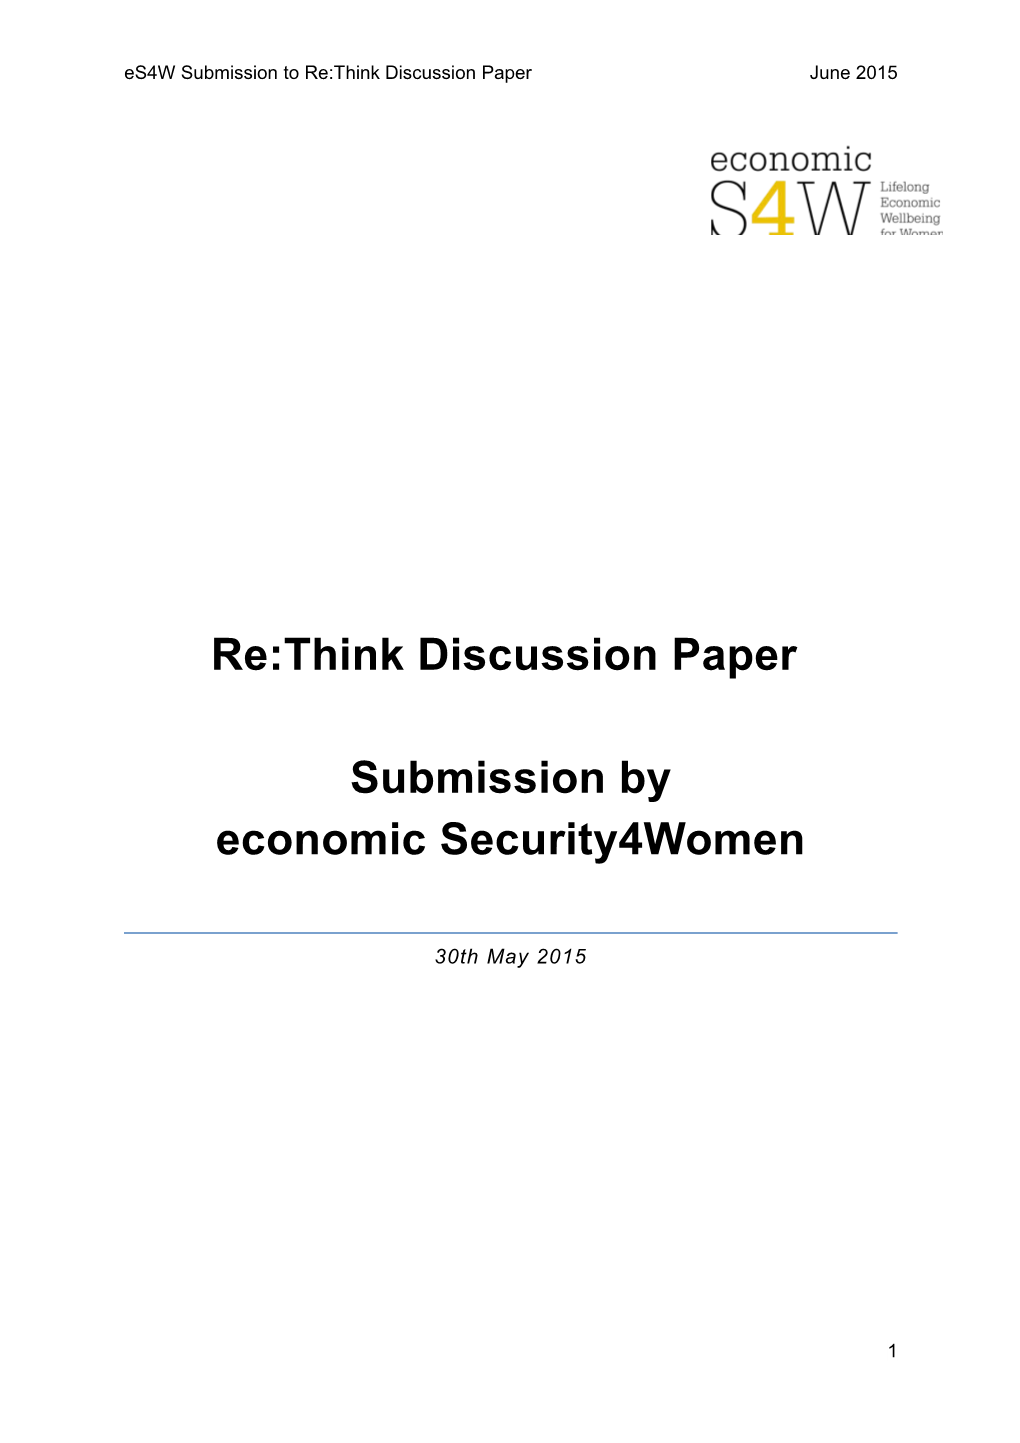 Economic Security4women - Submission to the Tax Discussion Paper